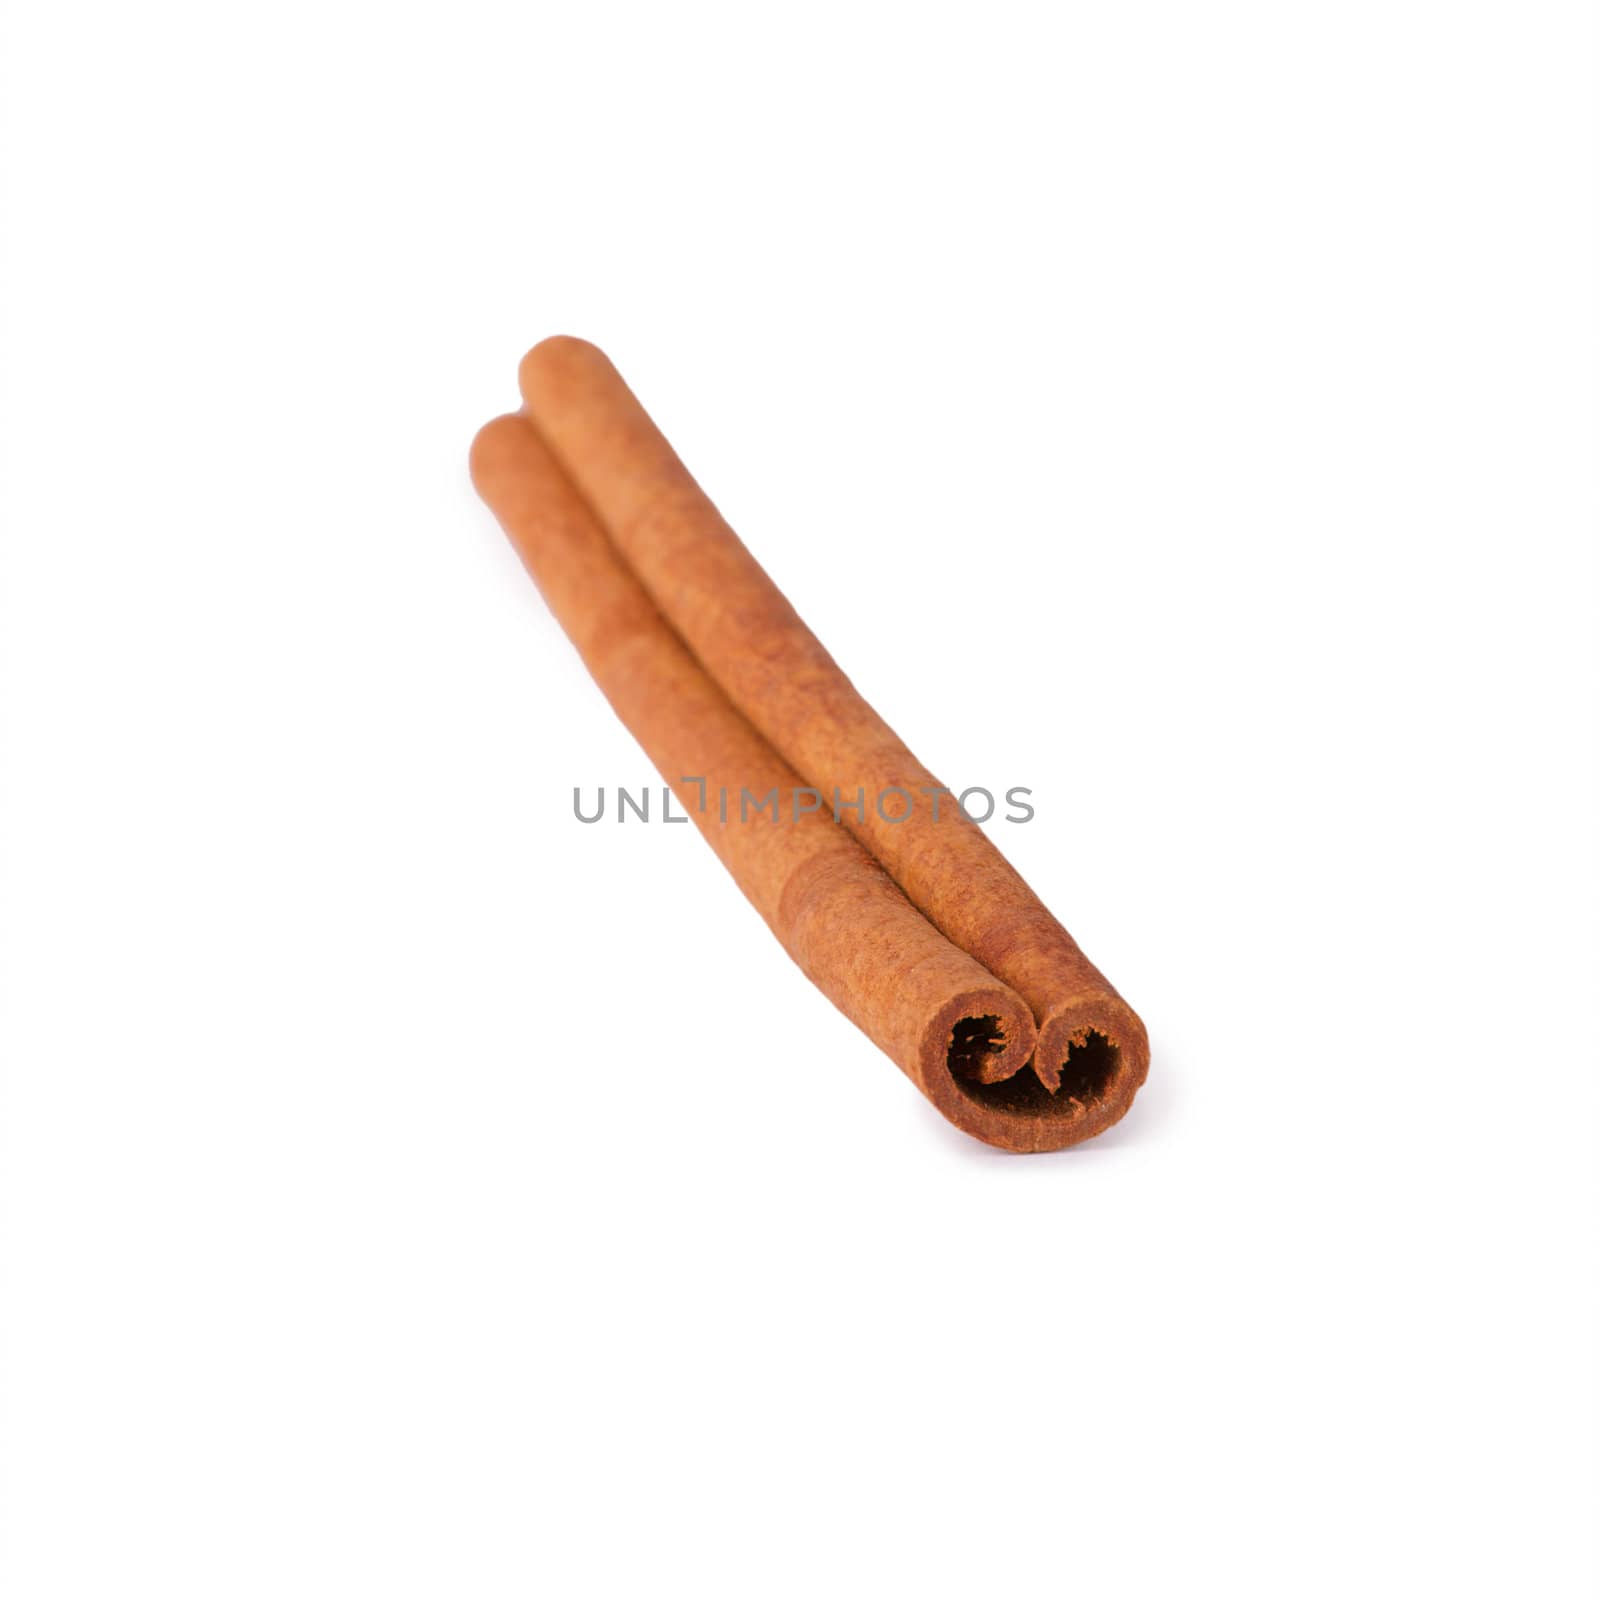 One cinnamon stick isolated on white background